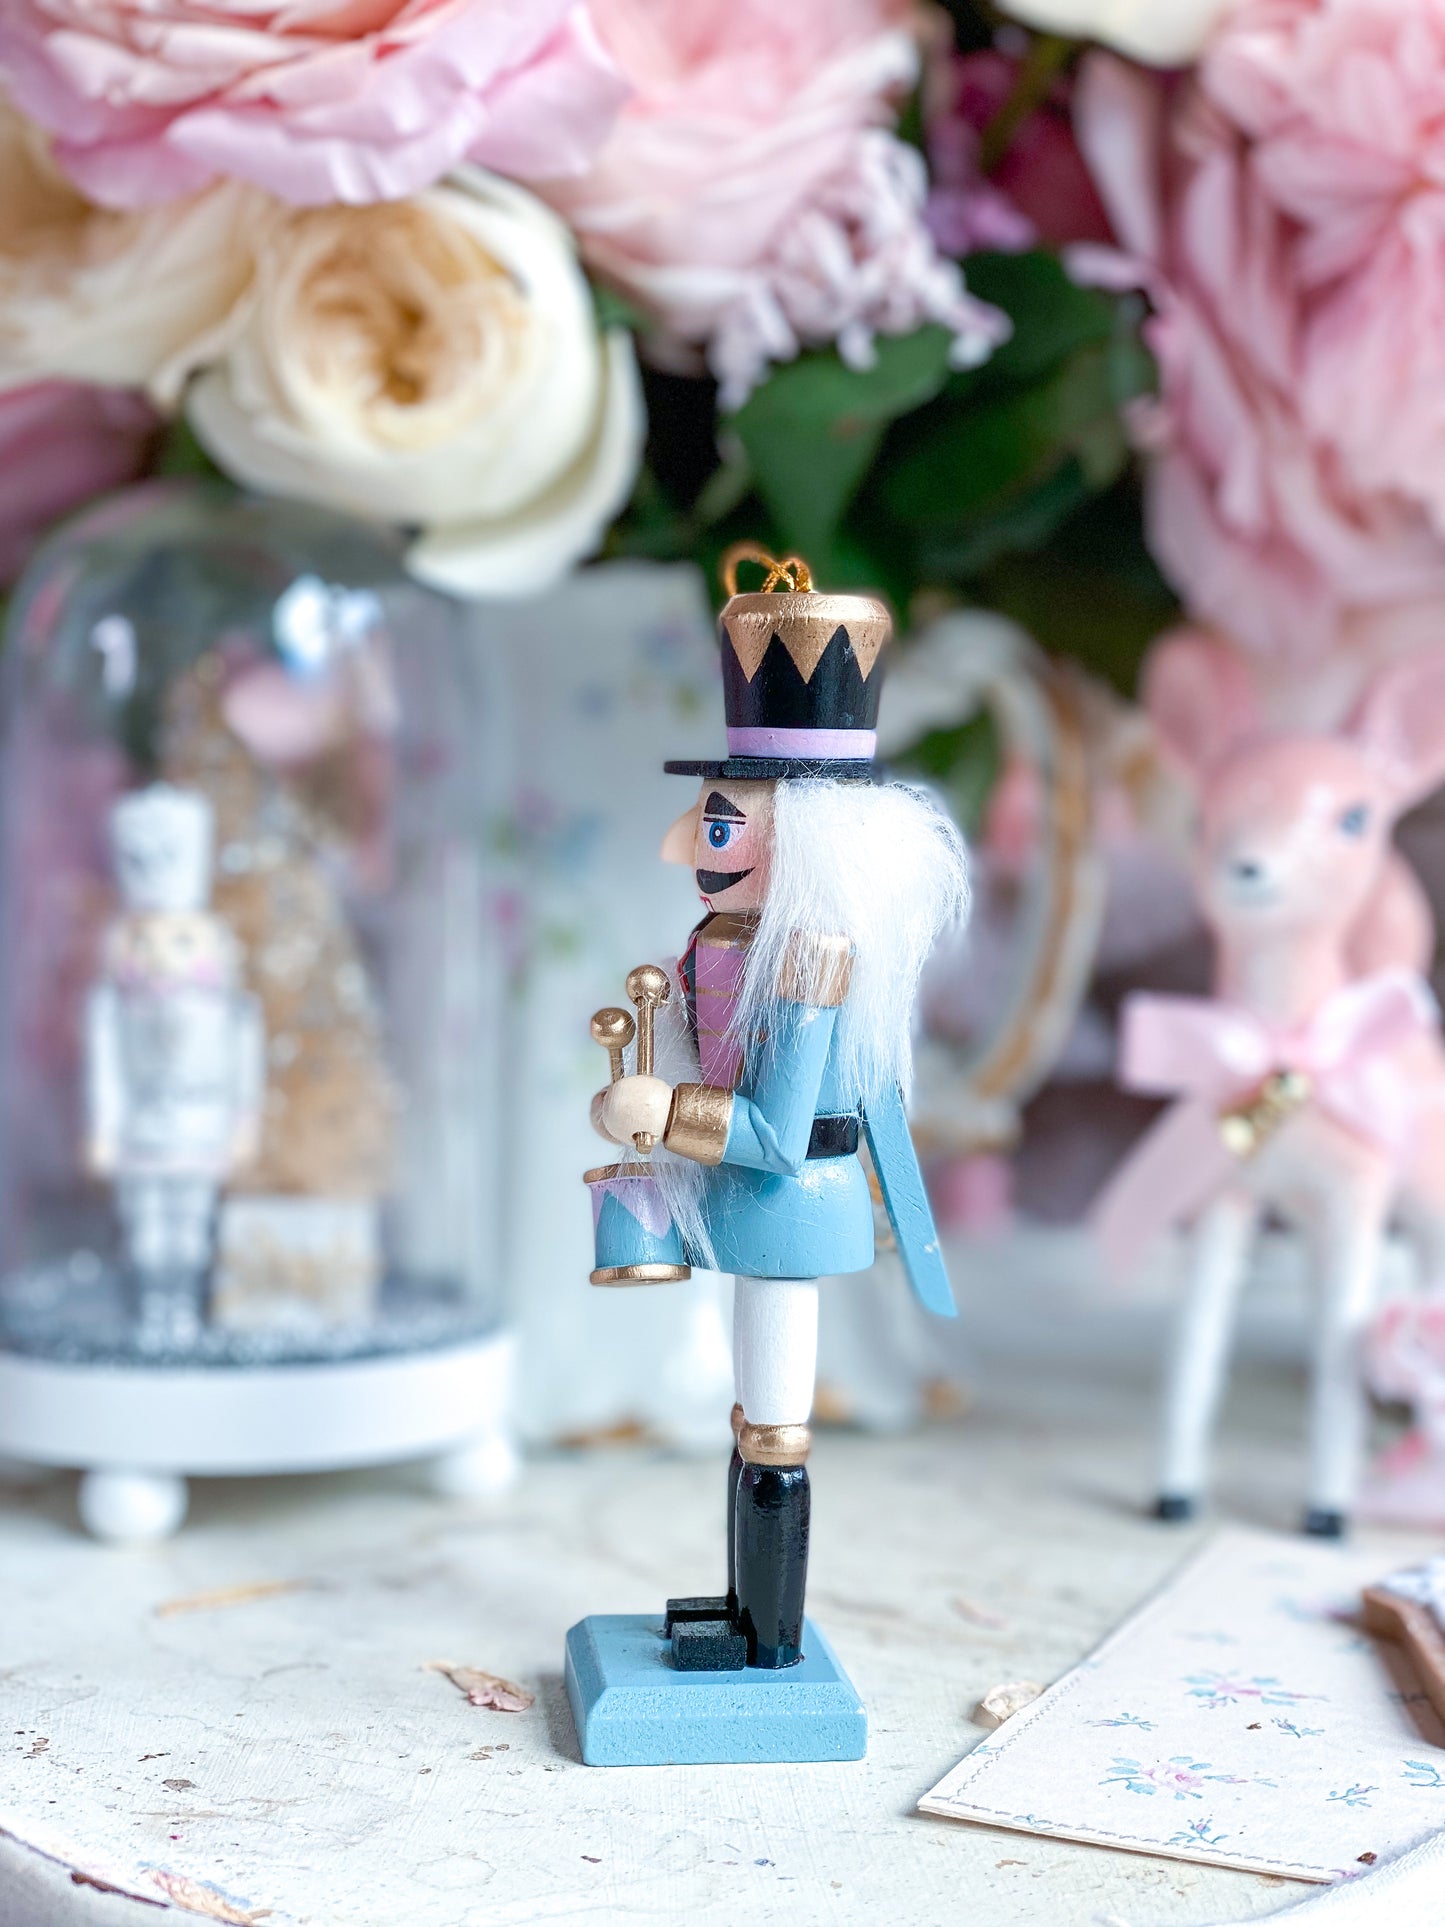 Pink and blue nutcracker ornament